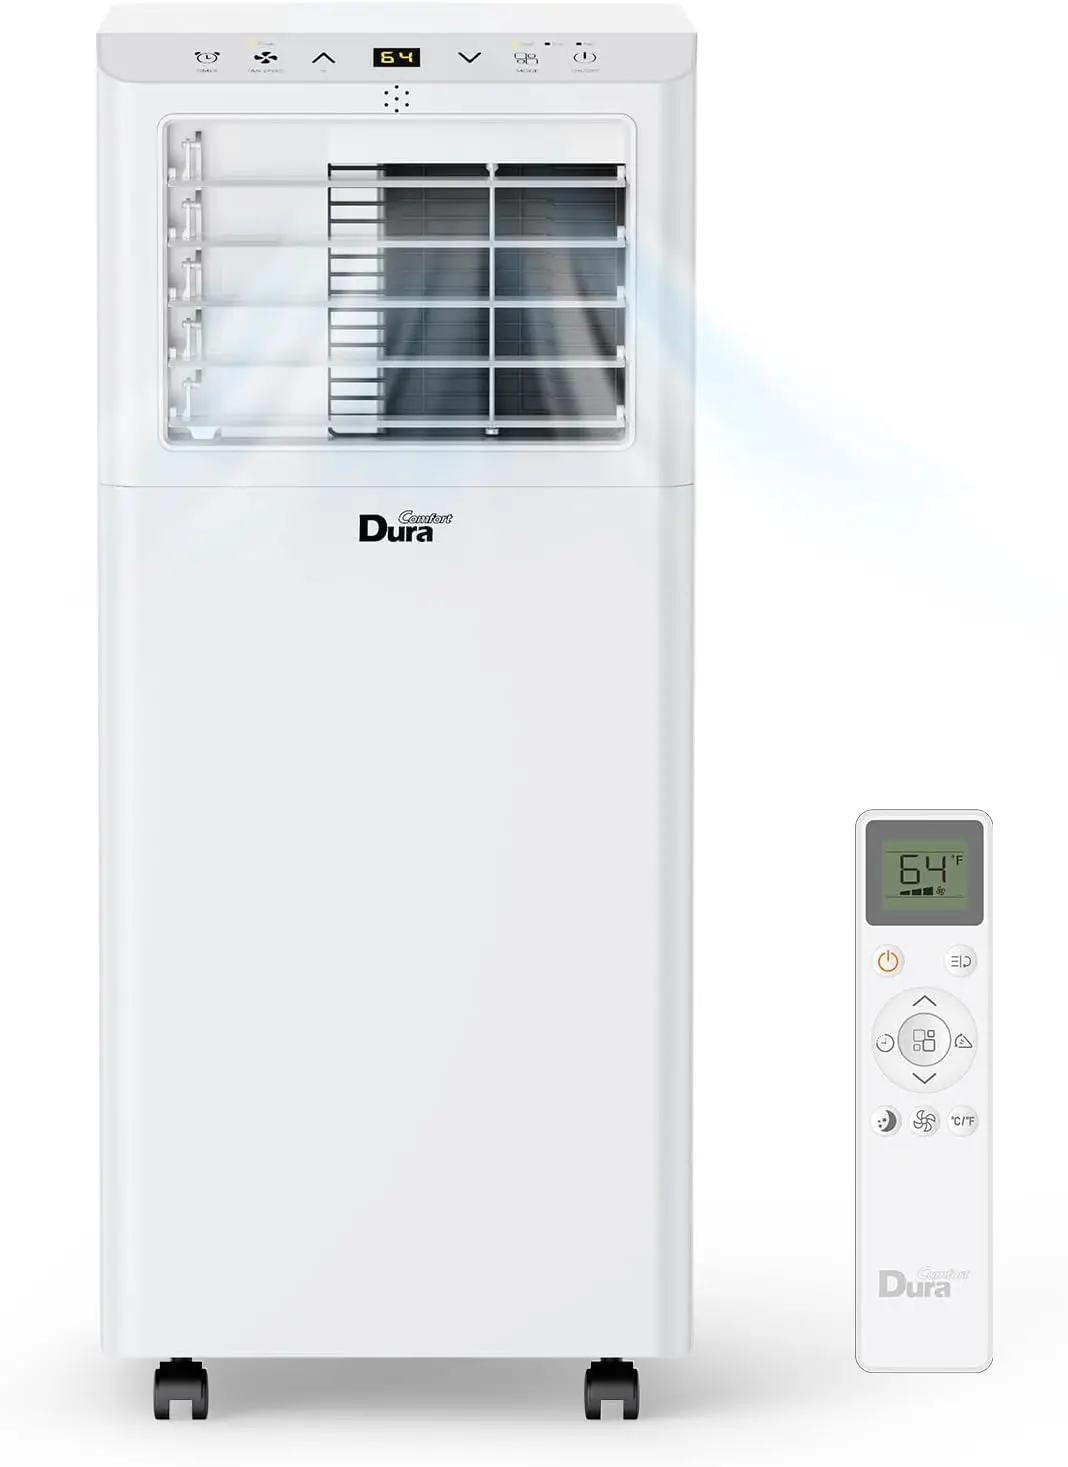 

Air Conditioners 8000 BTU, 3-in-1 AC Unit, Cool, Dehumidifier & Fan, for Room up to 200 Sq.Ft 4900 BTU SACC